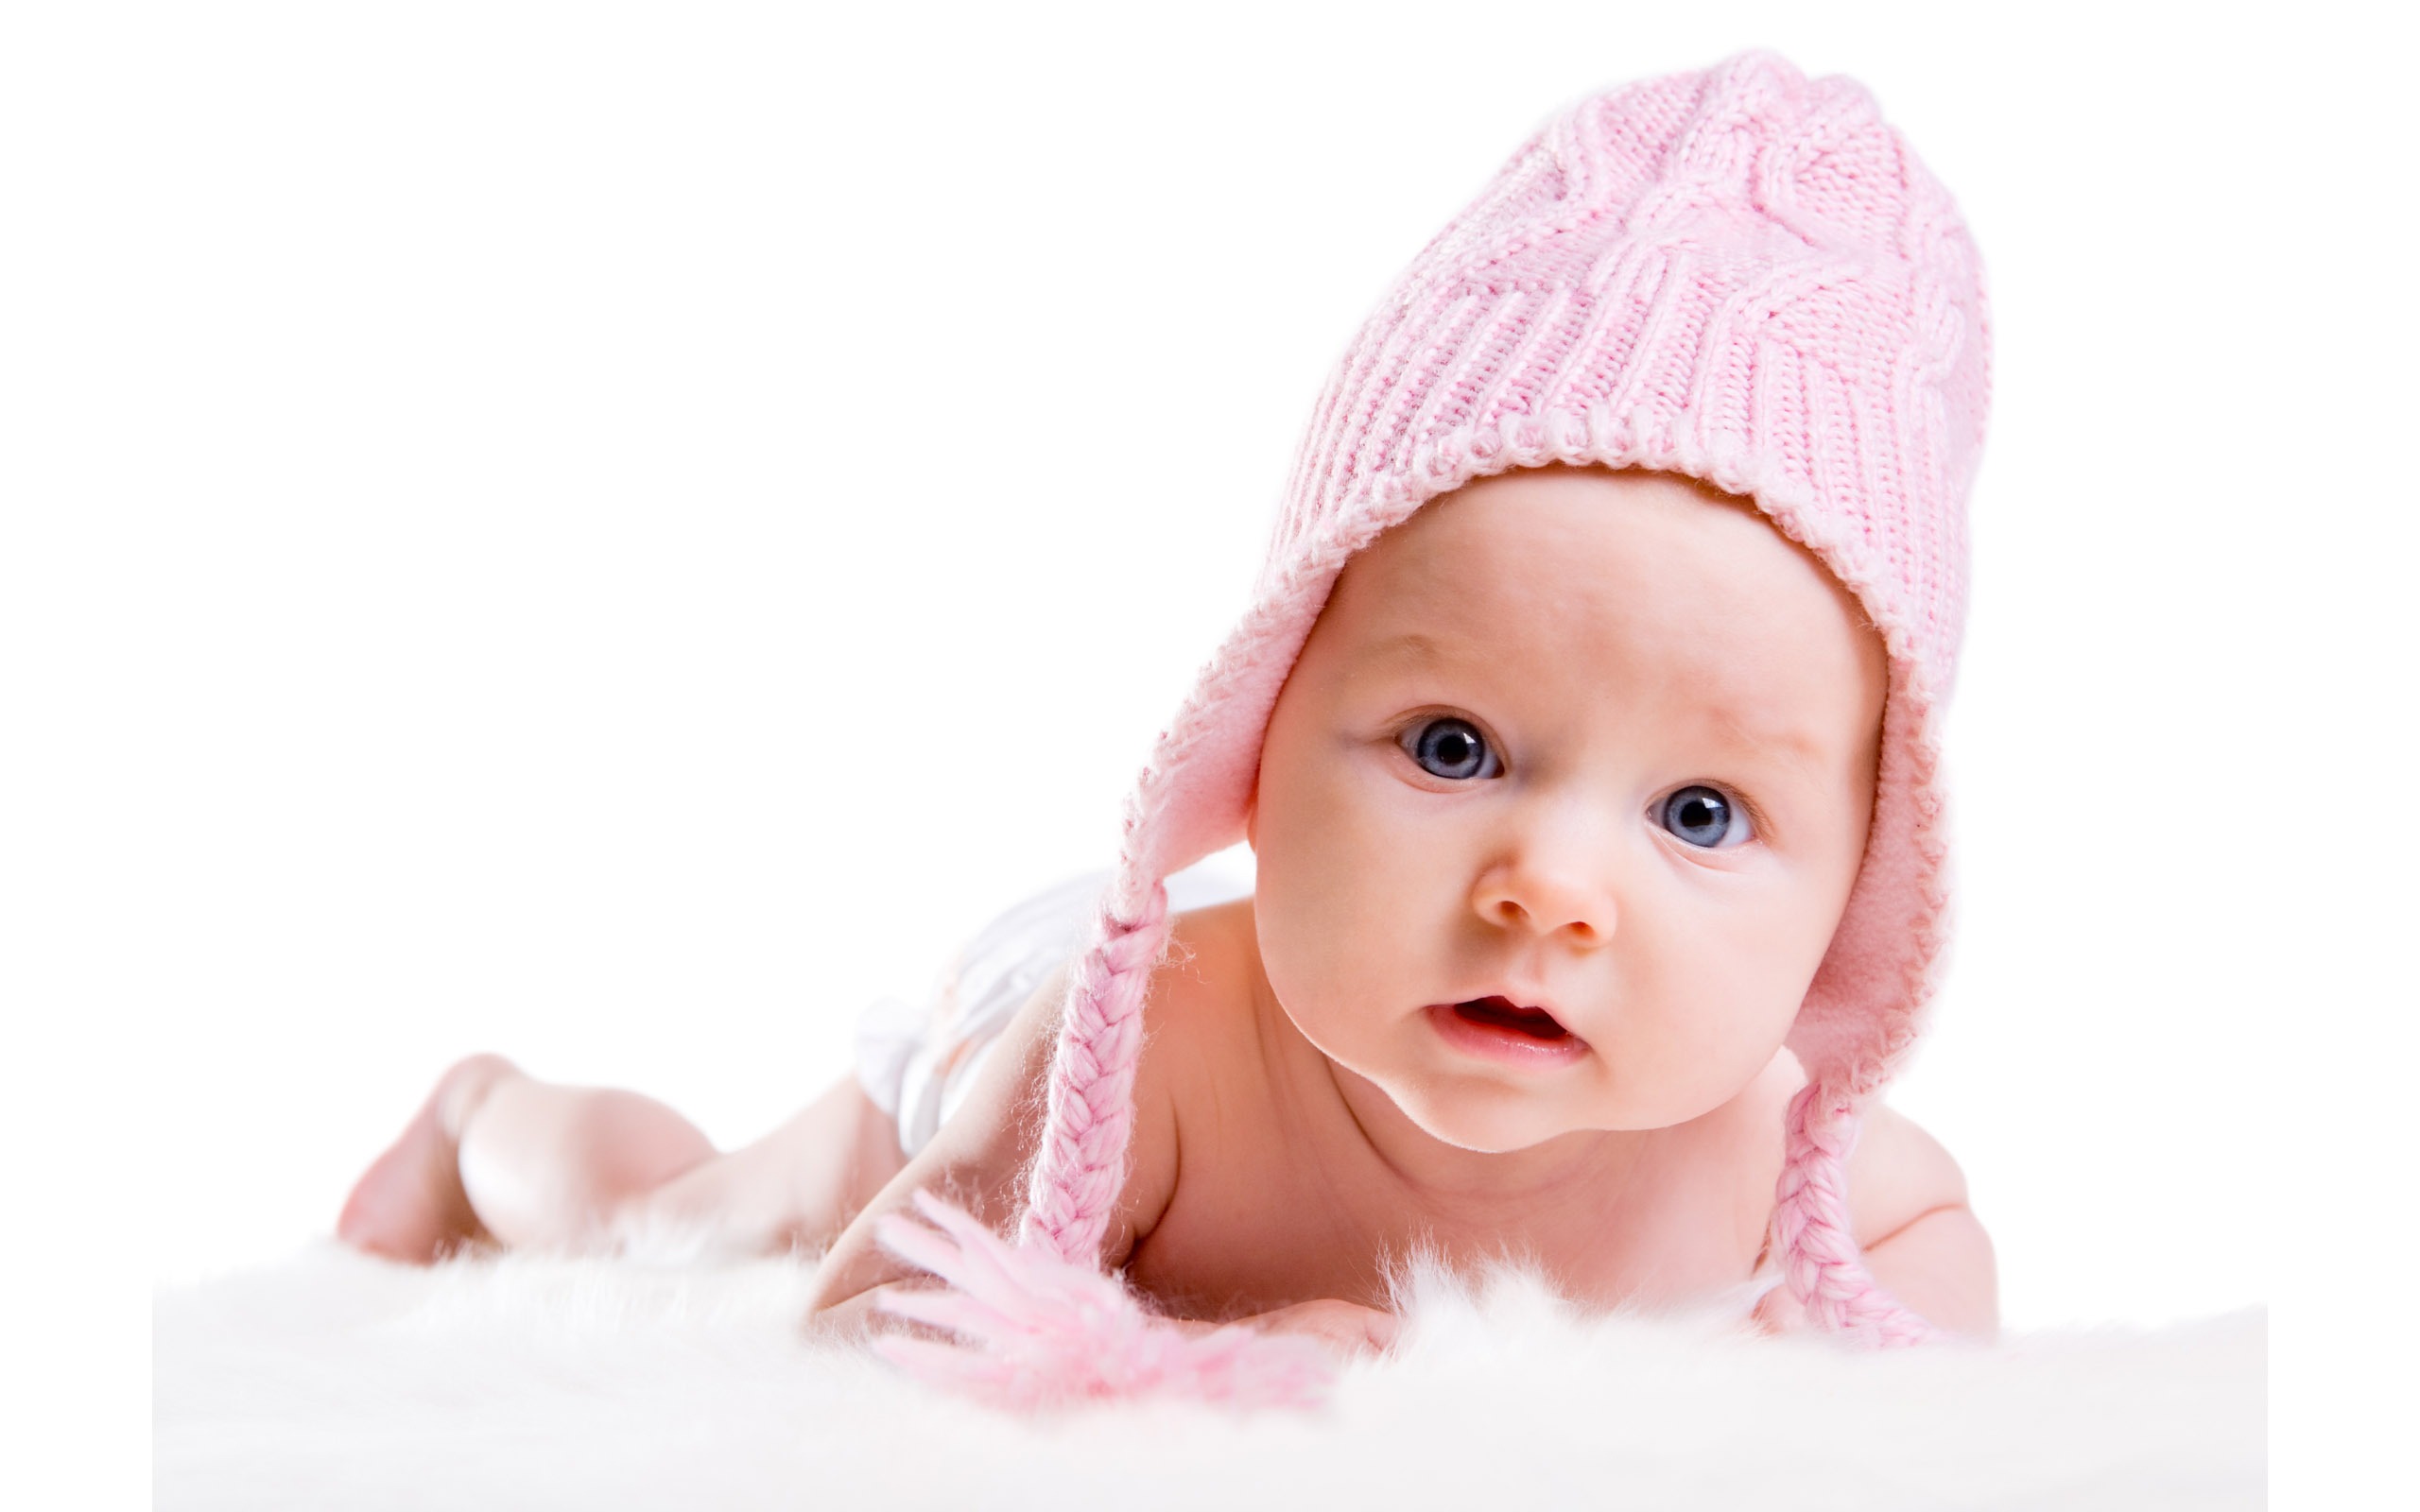 Cute Baby Wallpapers (4) #11 - 2560x1600